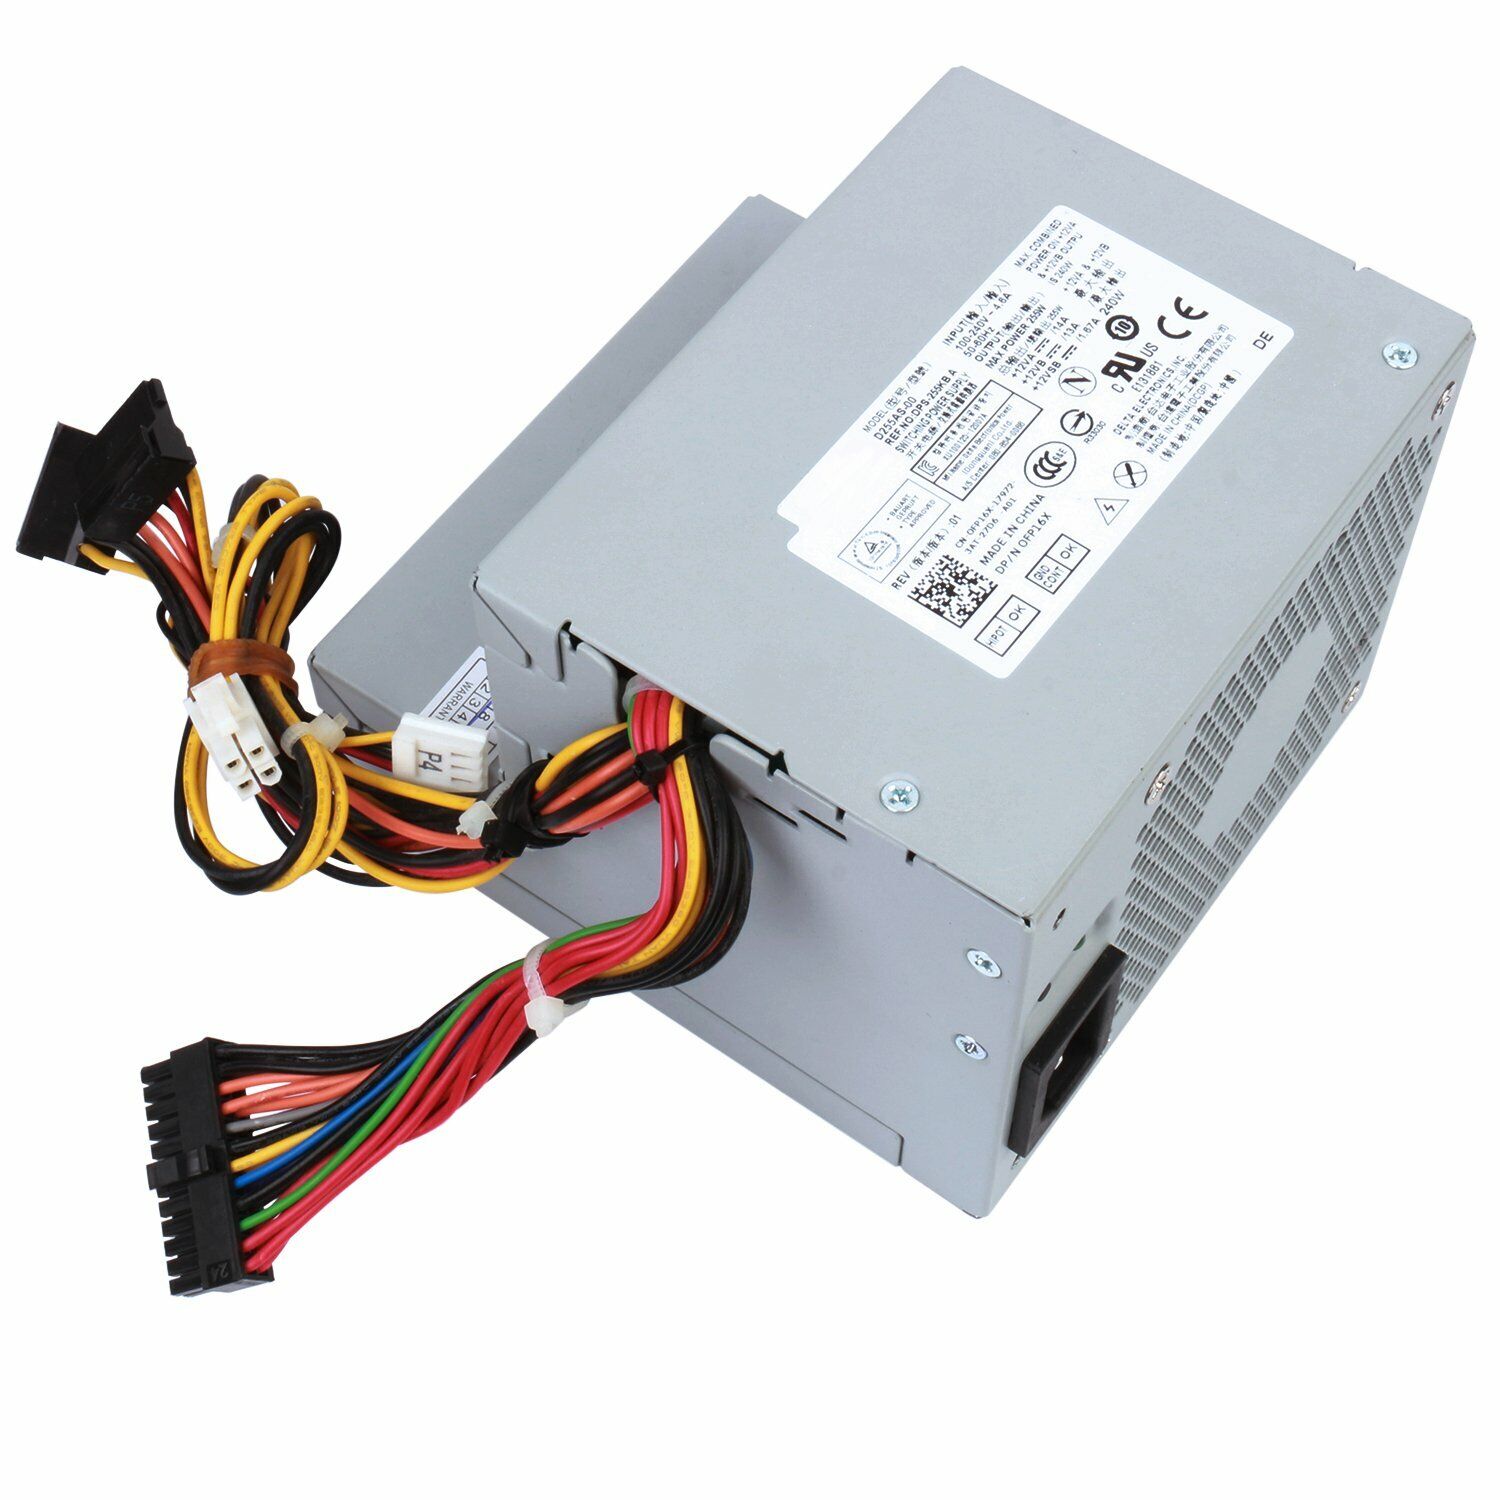 NEW 255W Power Supply L255P-01 L255P-01 D255AS-00 for Dell 760 780 960 980 DT